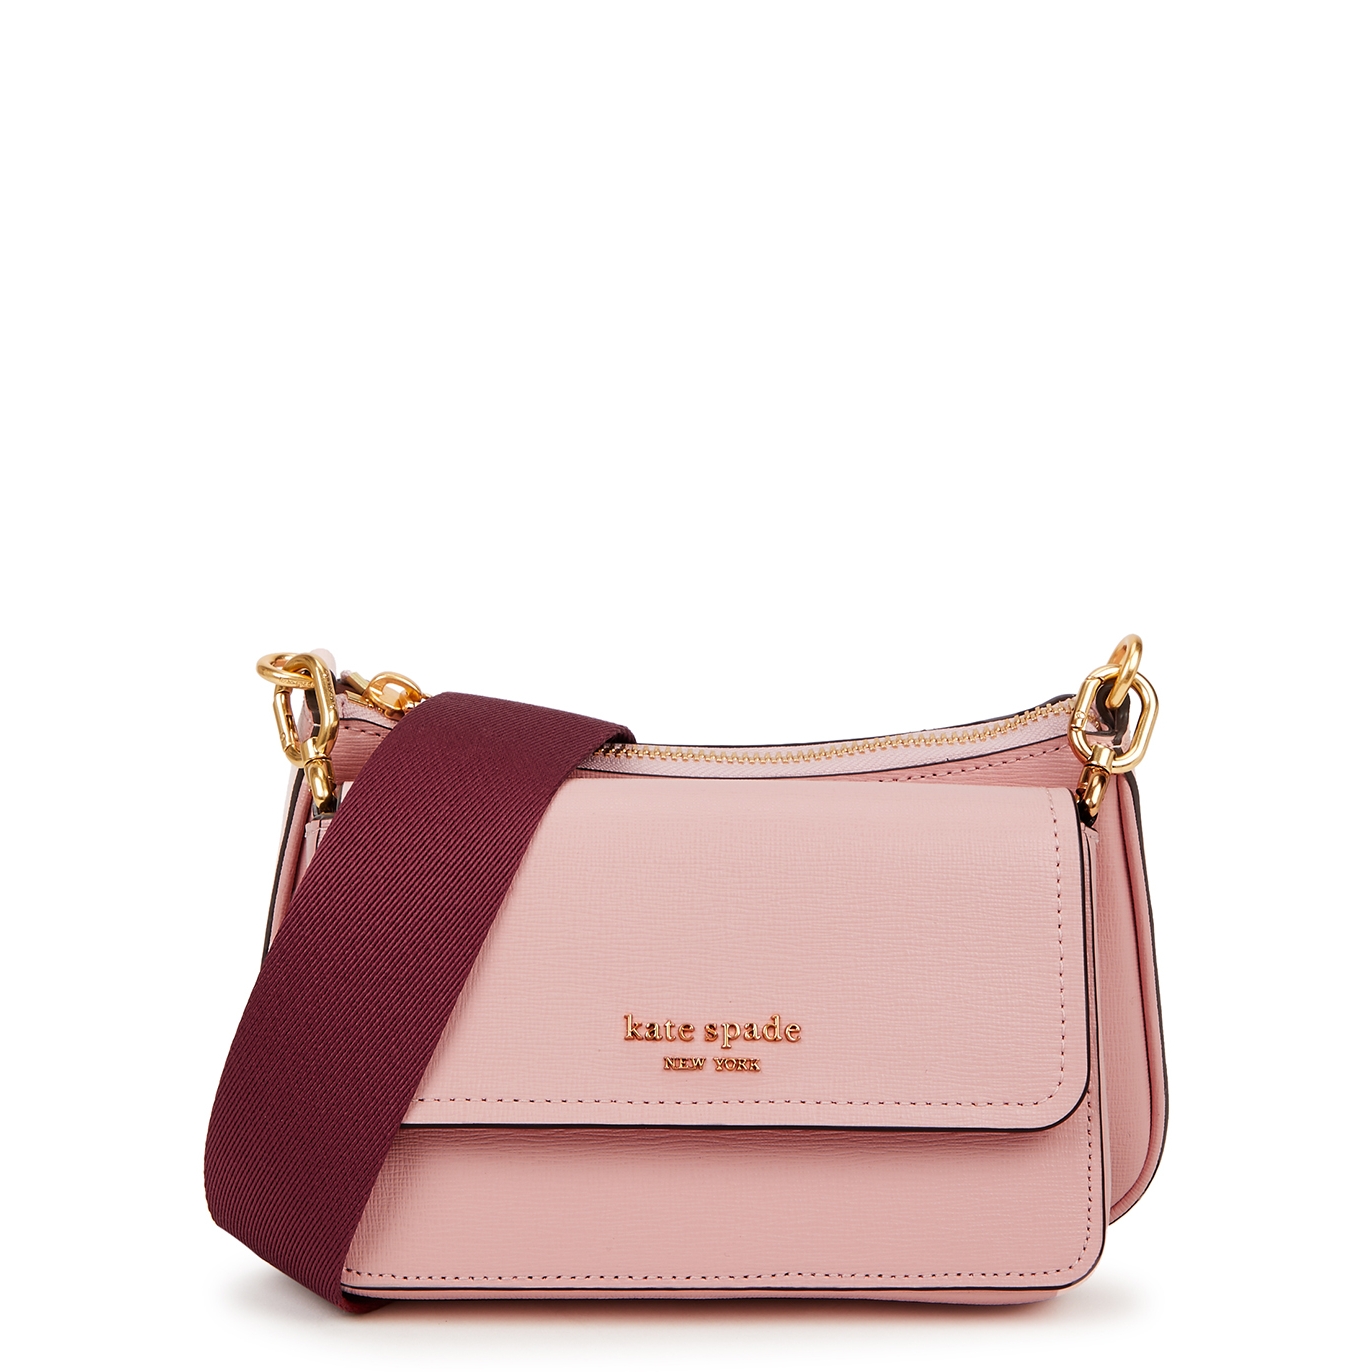 Kate Spade New York Morgan Double Up Leather Cross Body Bag